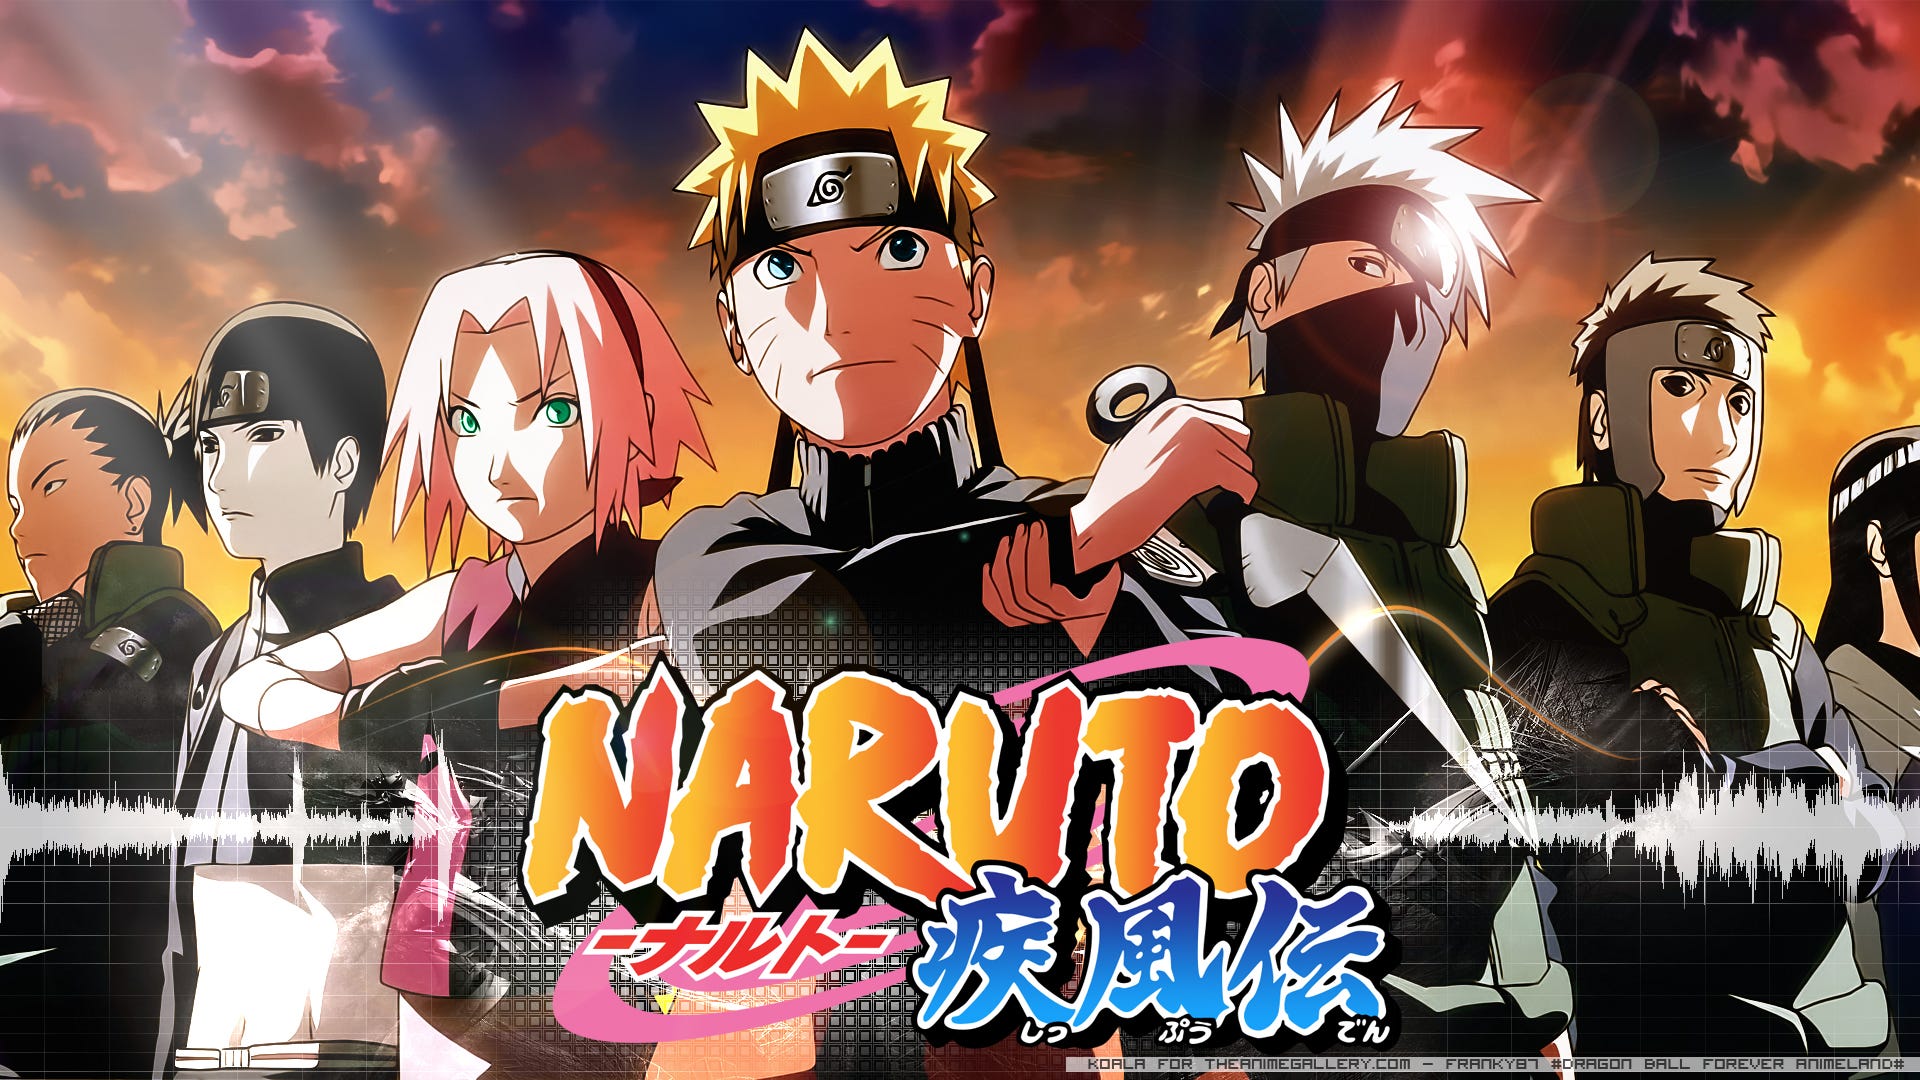 Let's say you were in the world of Naruto and Could choose, your